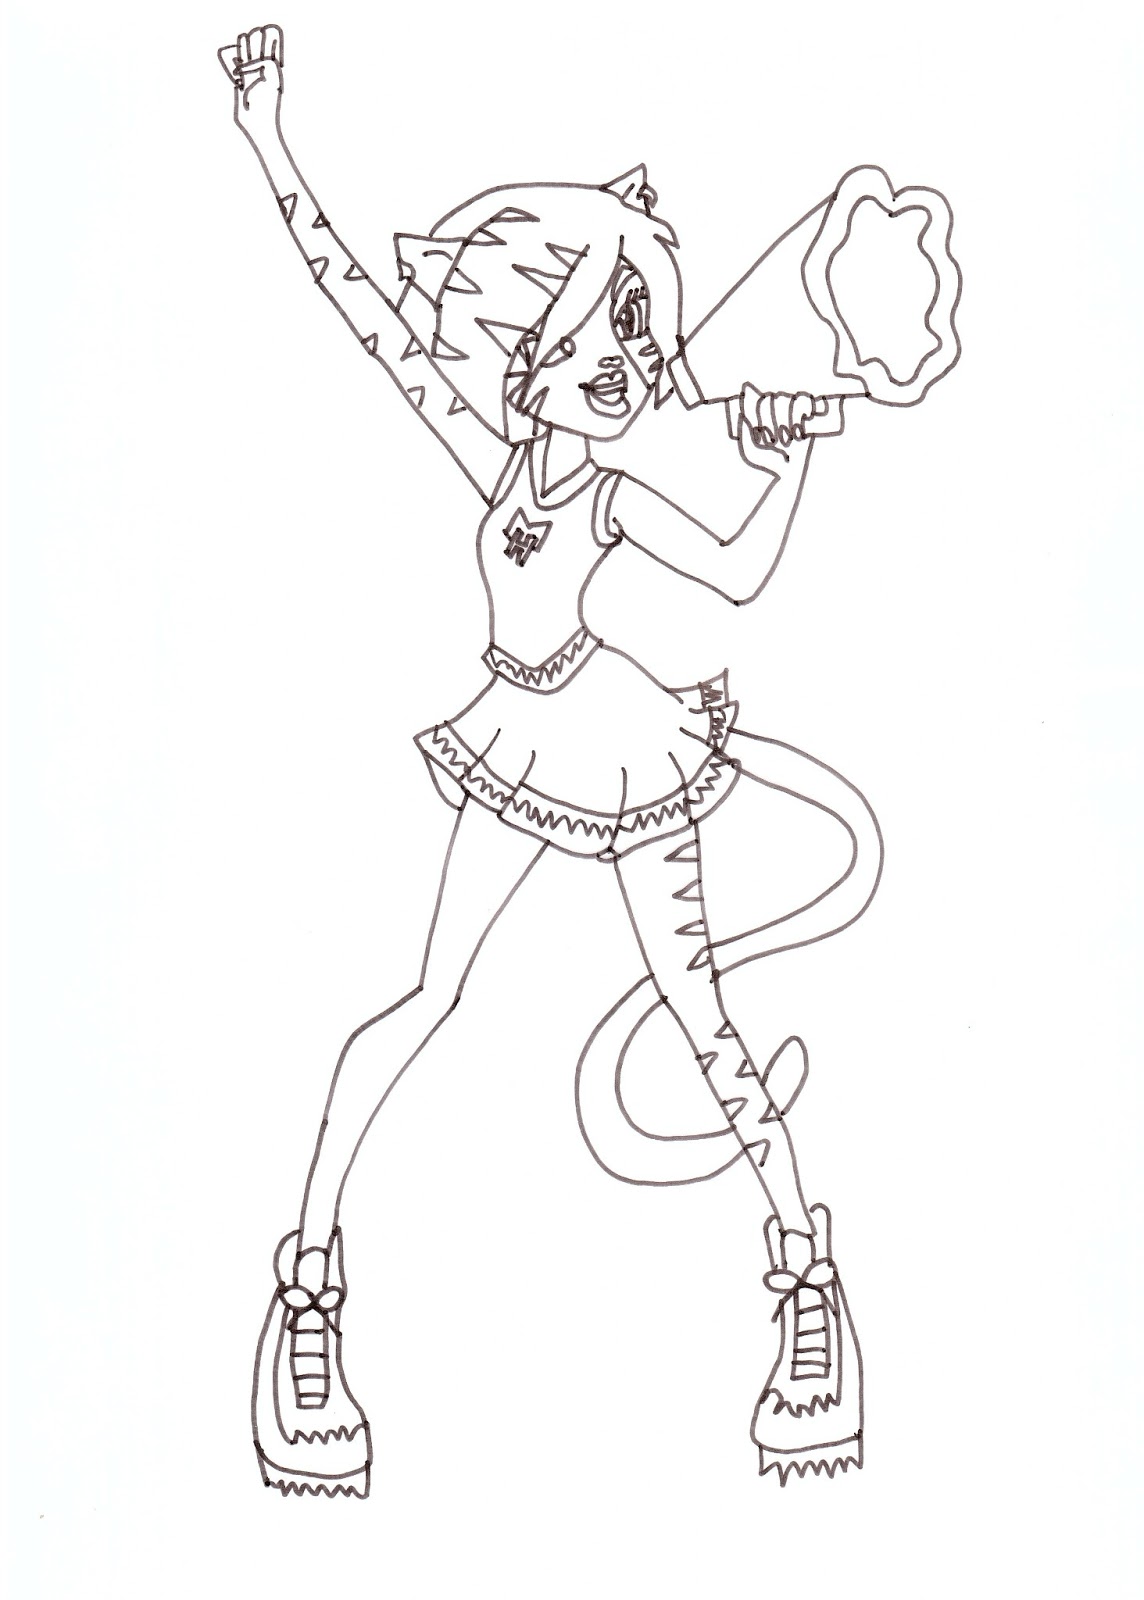 Download Free Printable Monster High Coloring Pages: Toralei Fearleading Coloring Sheet